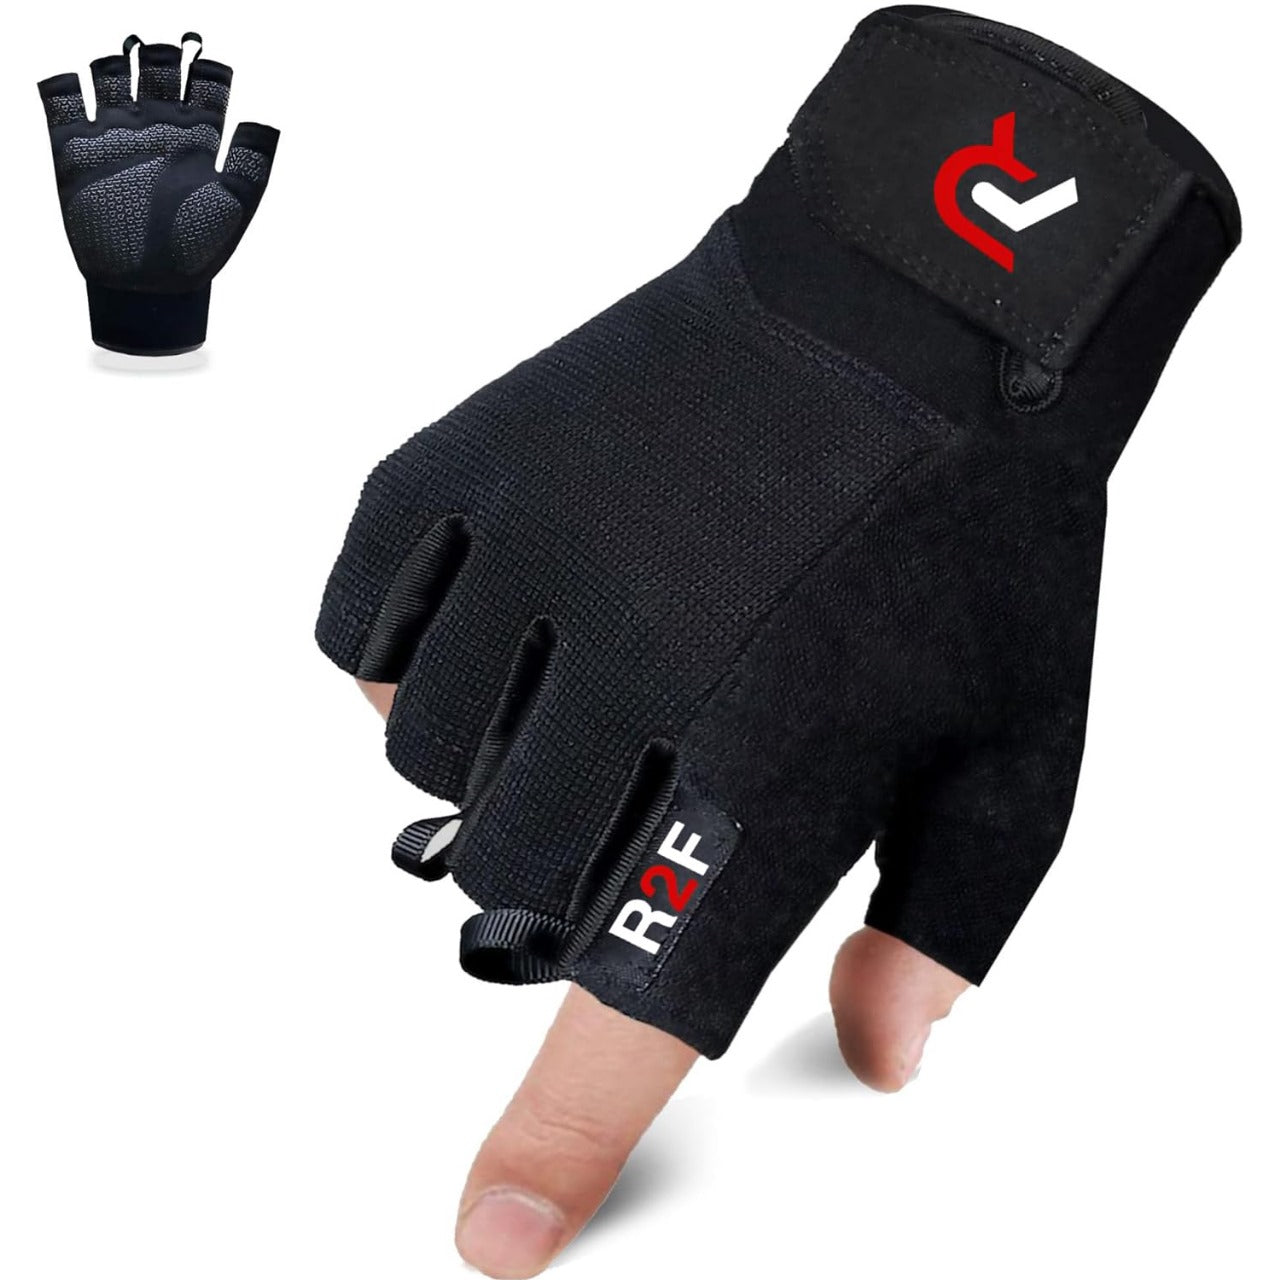 Shop high-quality weight lifting gloves and gym gloves for your workout at R2F Sports. Our gloves provide superior grip, wrist support, and comfort, allowing you to maximize your performance and protect your hands during intense training sessions. Experience the difference with R2F Sports today.